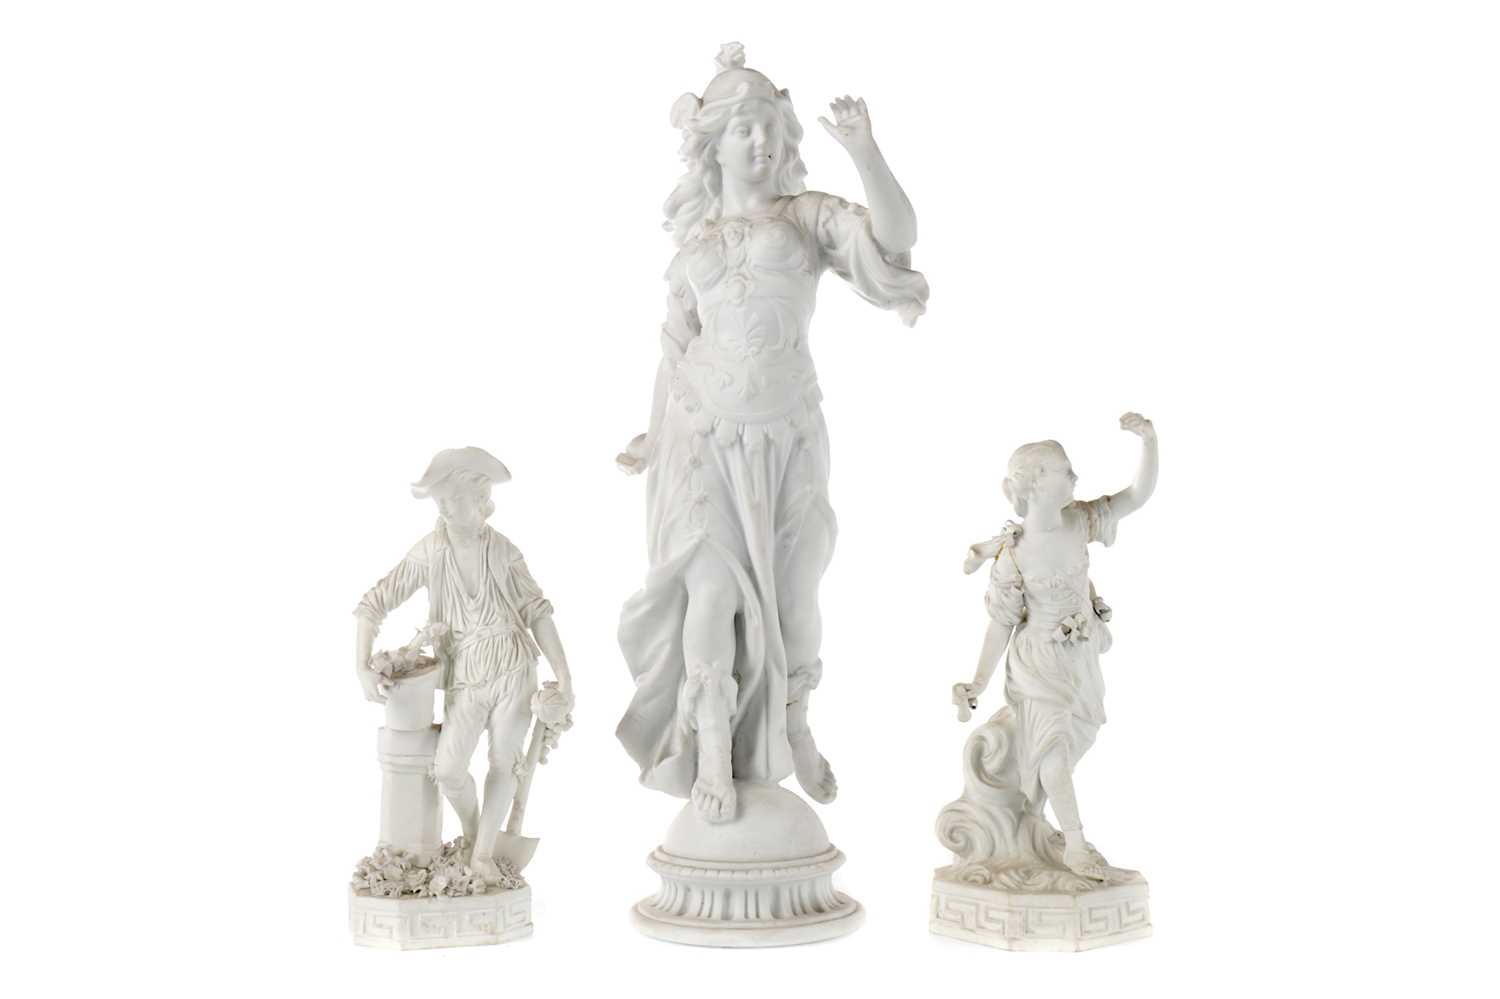 Lot 103 - A LATE 19TH CENTURY BISCUIT PORCELAIN FIGURE OF A BELLONA ALONG WITH A PAIR OF FIGURES